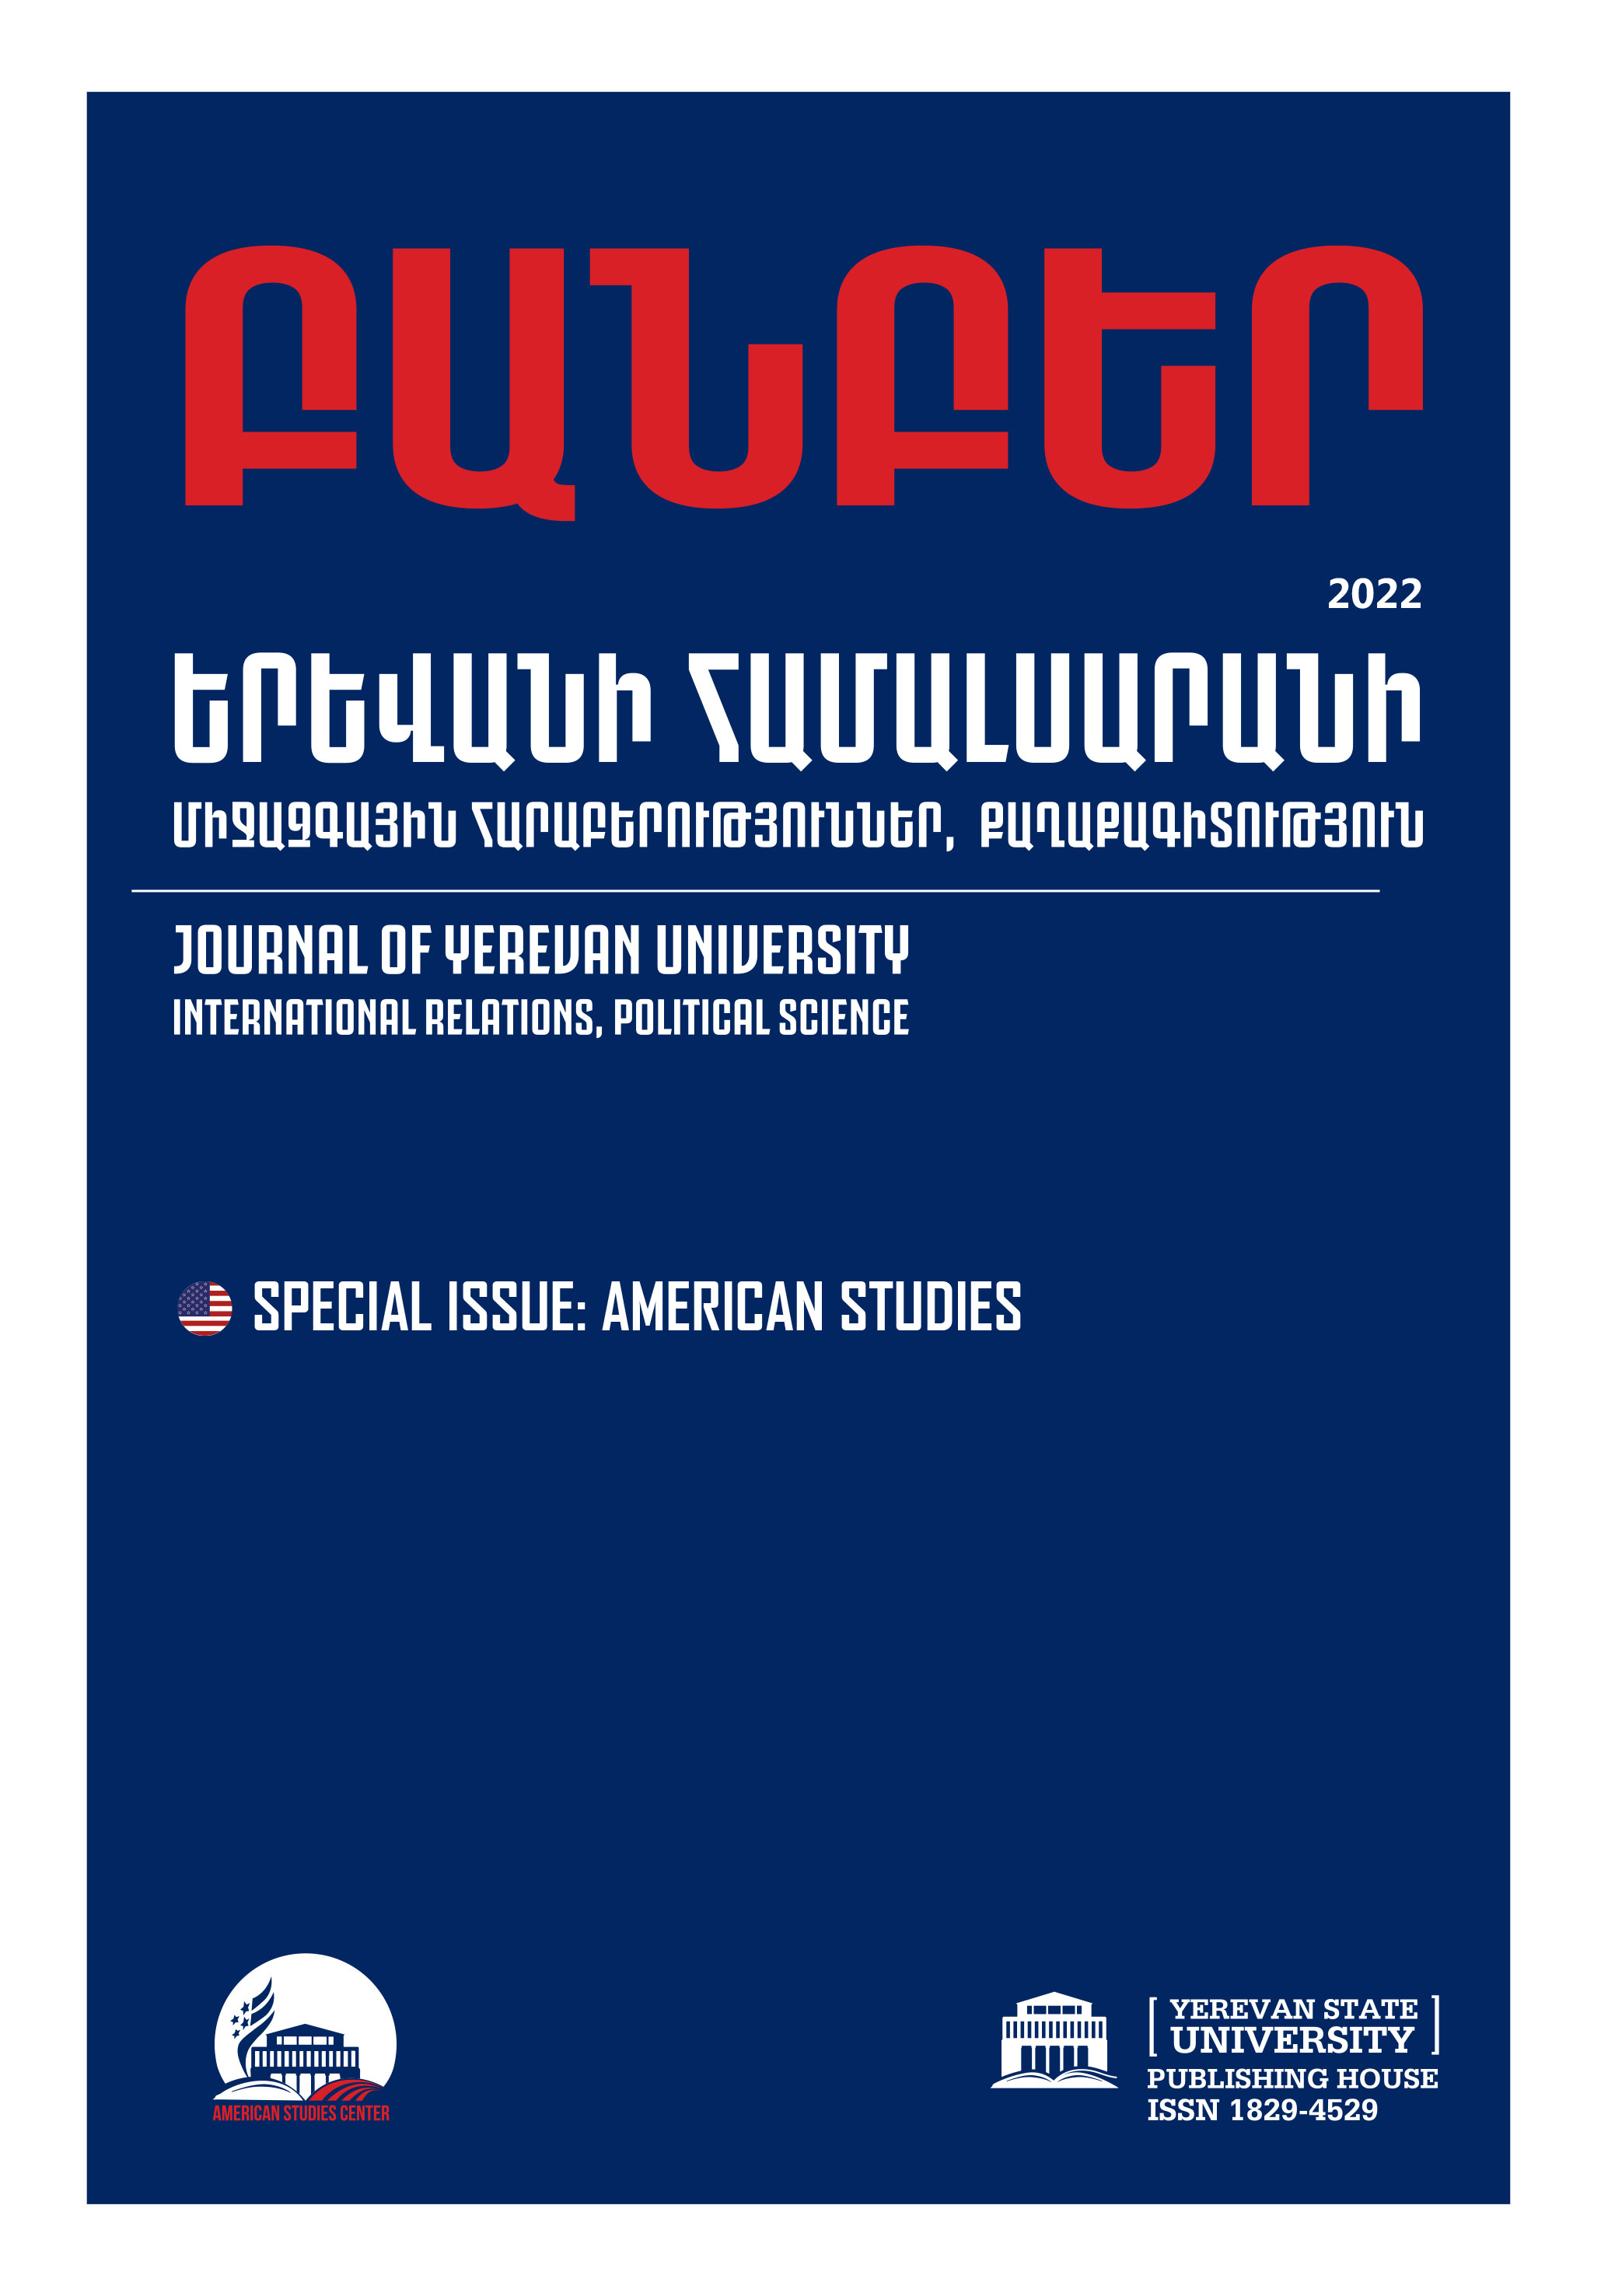 					View Vol. 1 (2022): SPECIAL ISSUE: AMERICAN STUDIES 
				